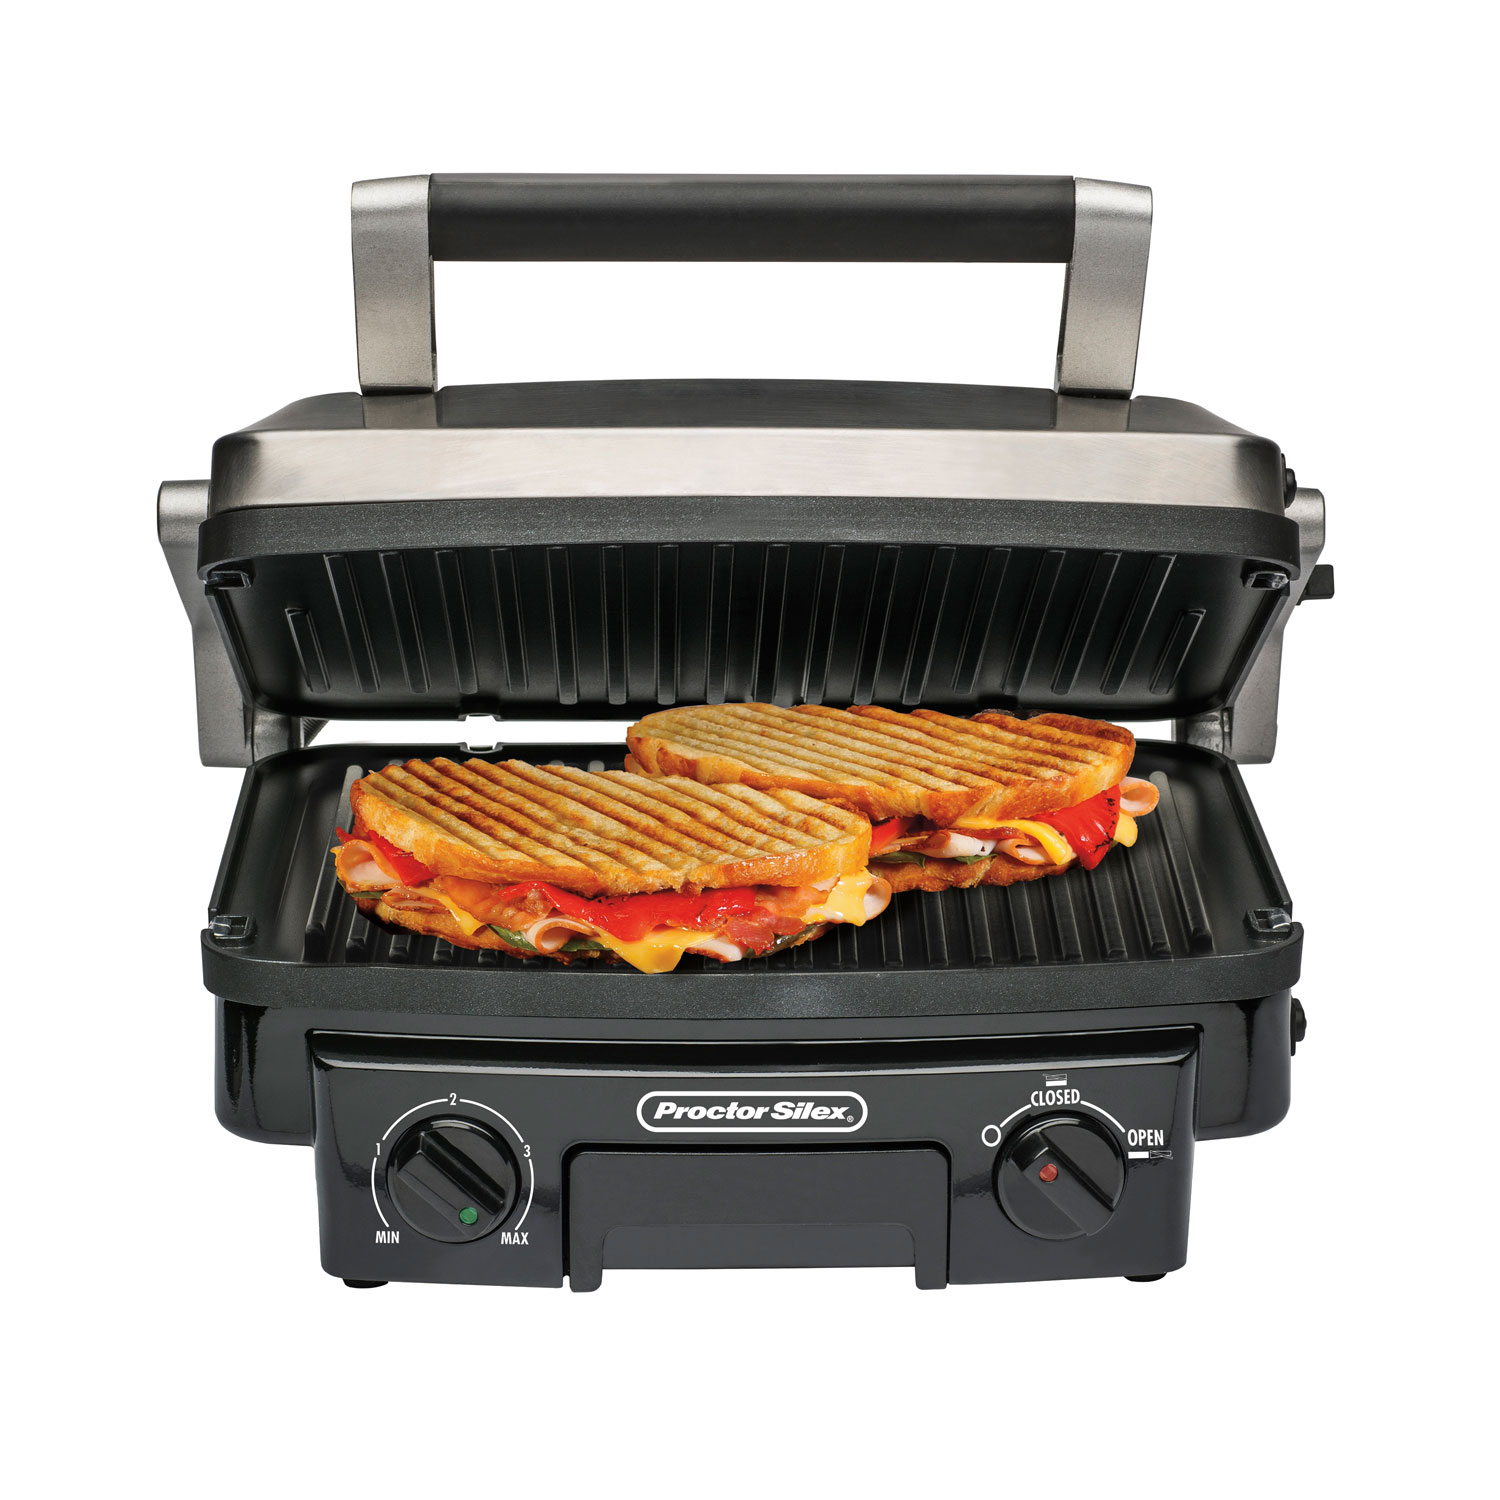 5-in-1 Grill with Griddle - 25340R